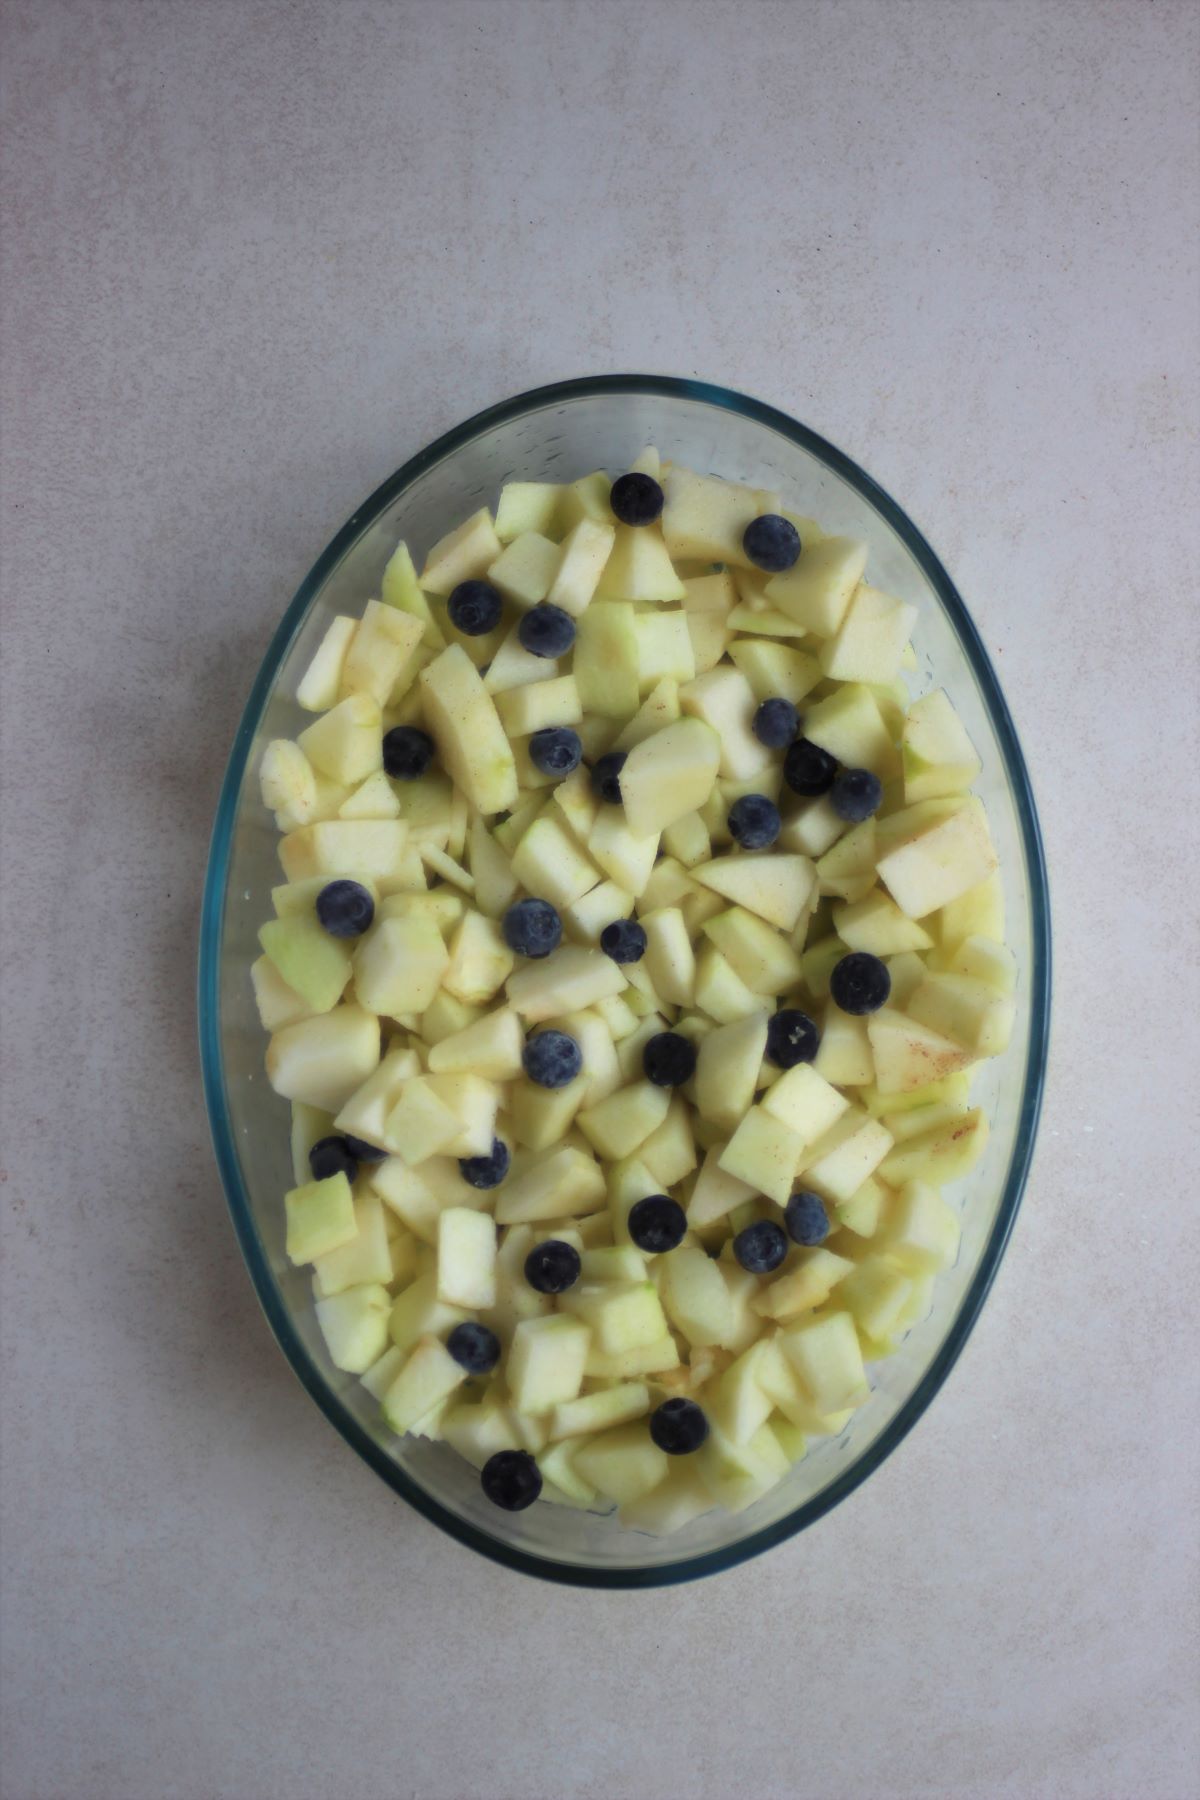 Oval baking dish with chopped and peel apples, and blueberries.